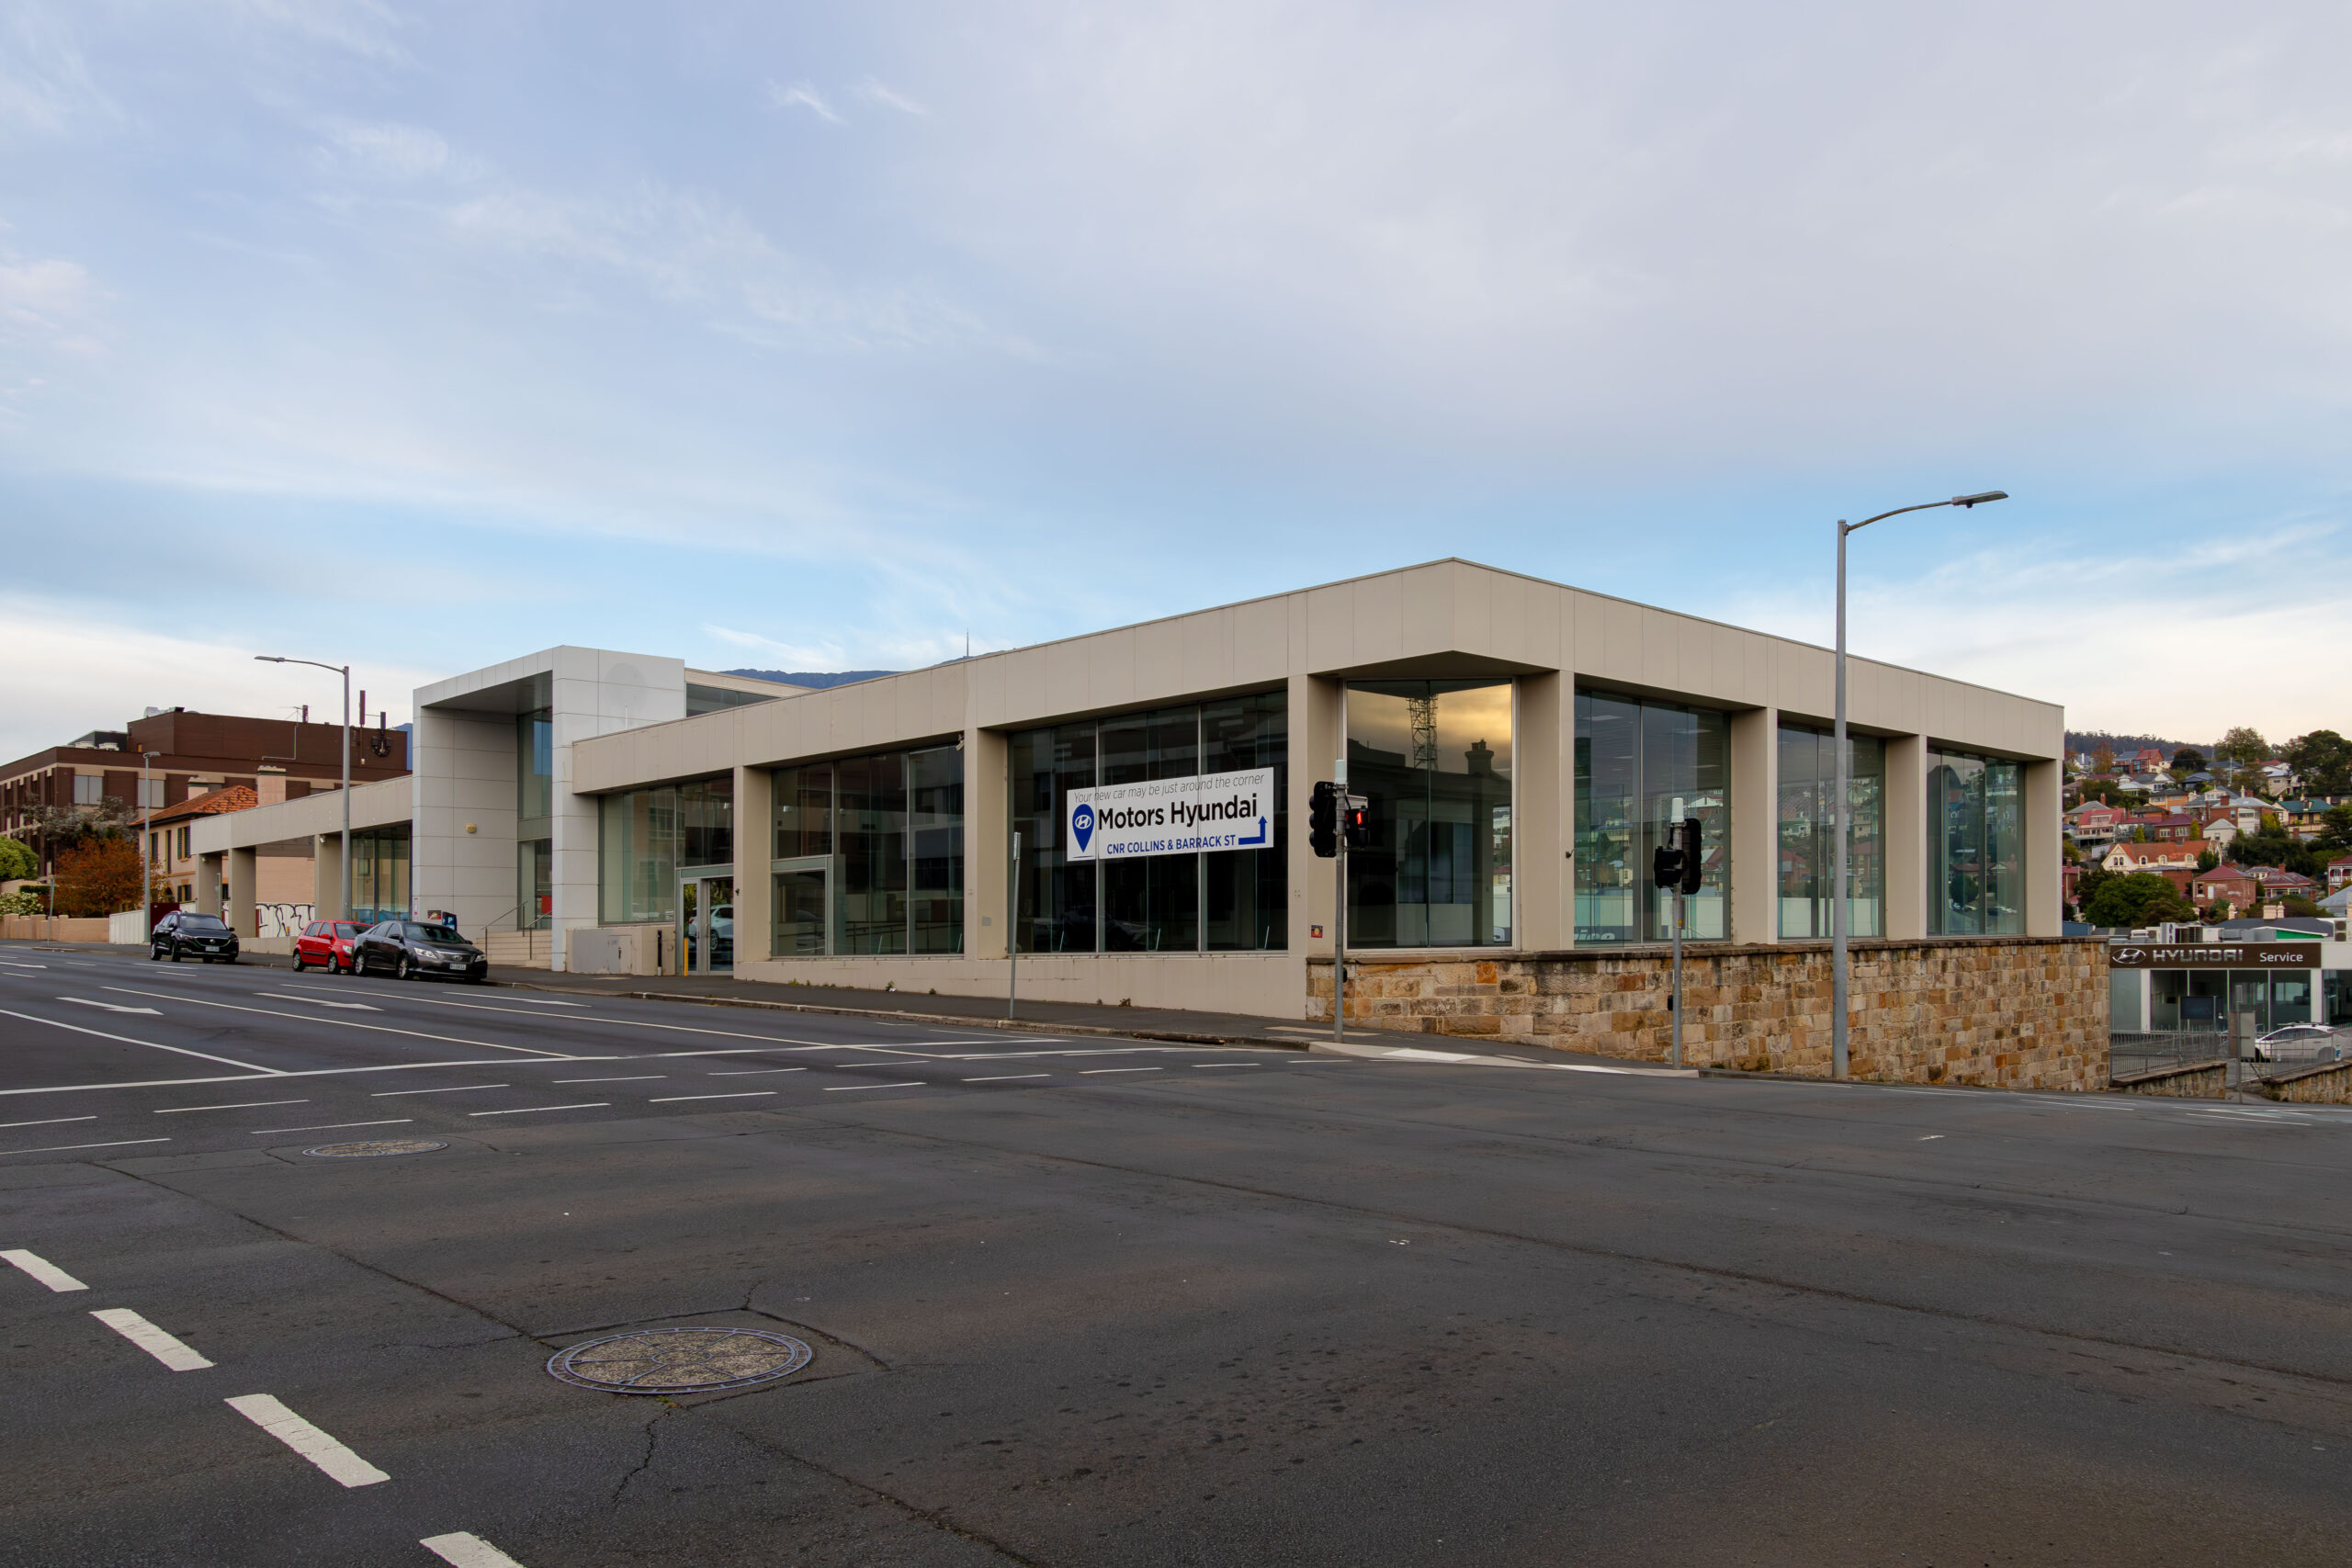 An empty former car dealership on an empty street. The glass walls sit atop a low sandstone wall